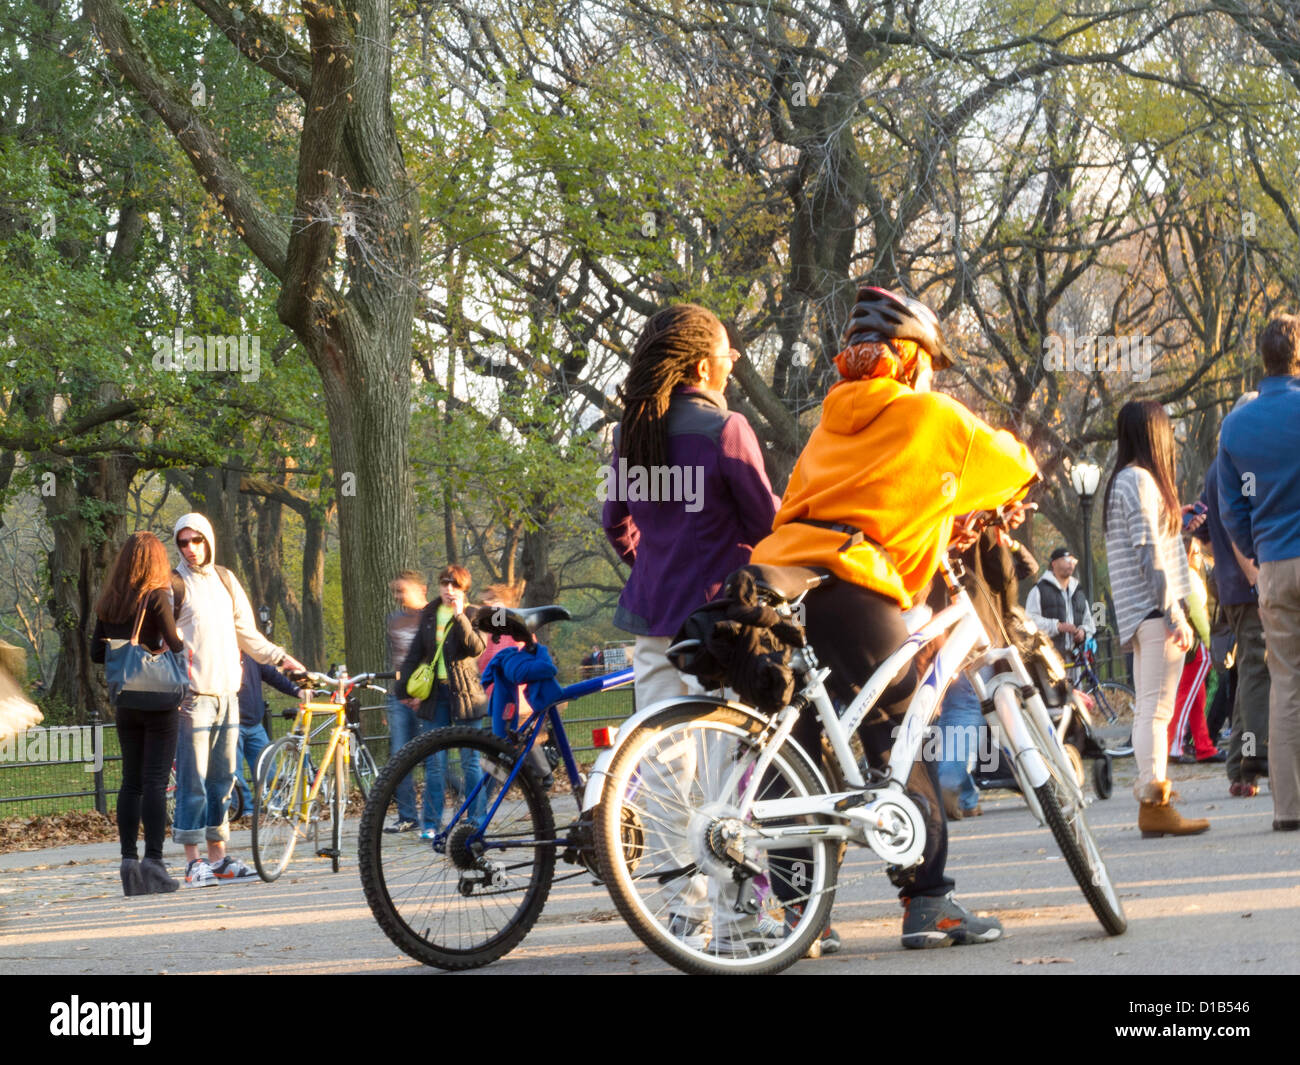 Tourists on Bikes, Central Park, NYC Stock Photo